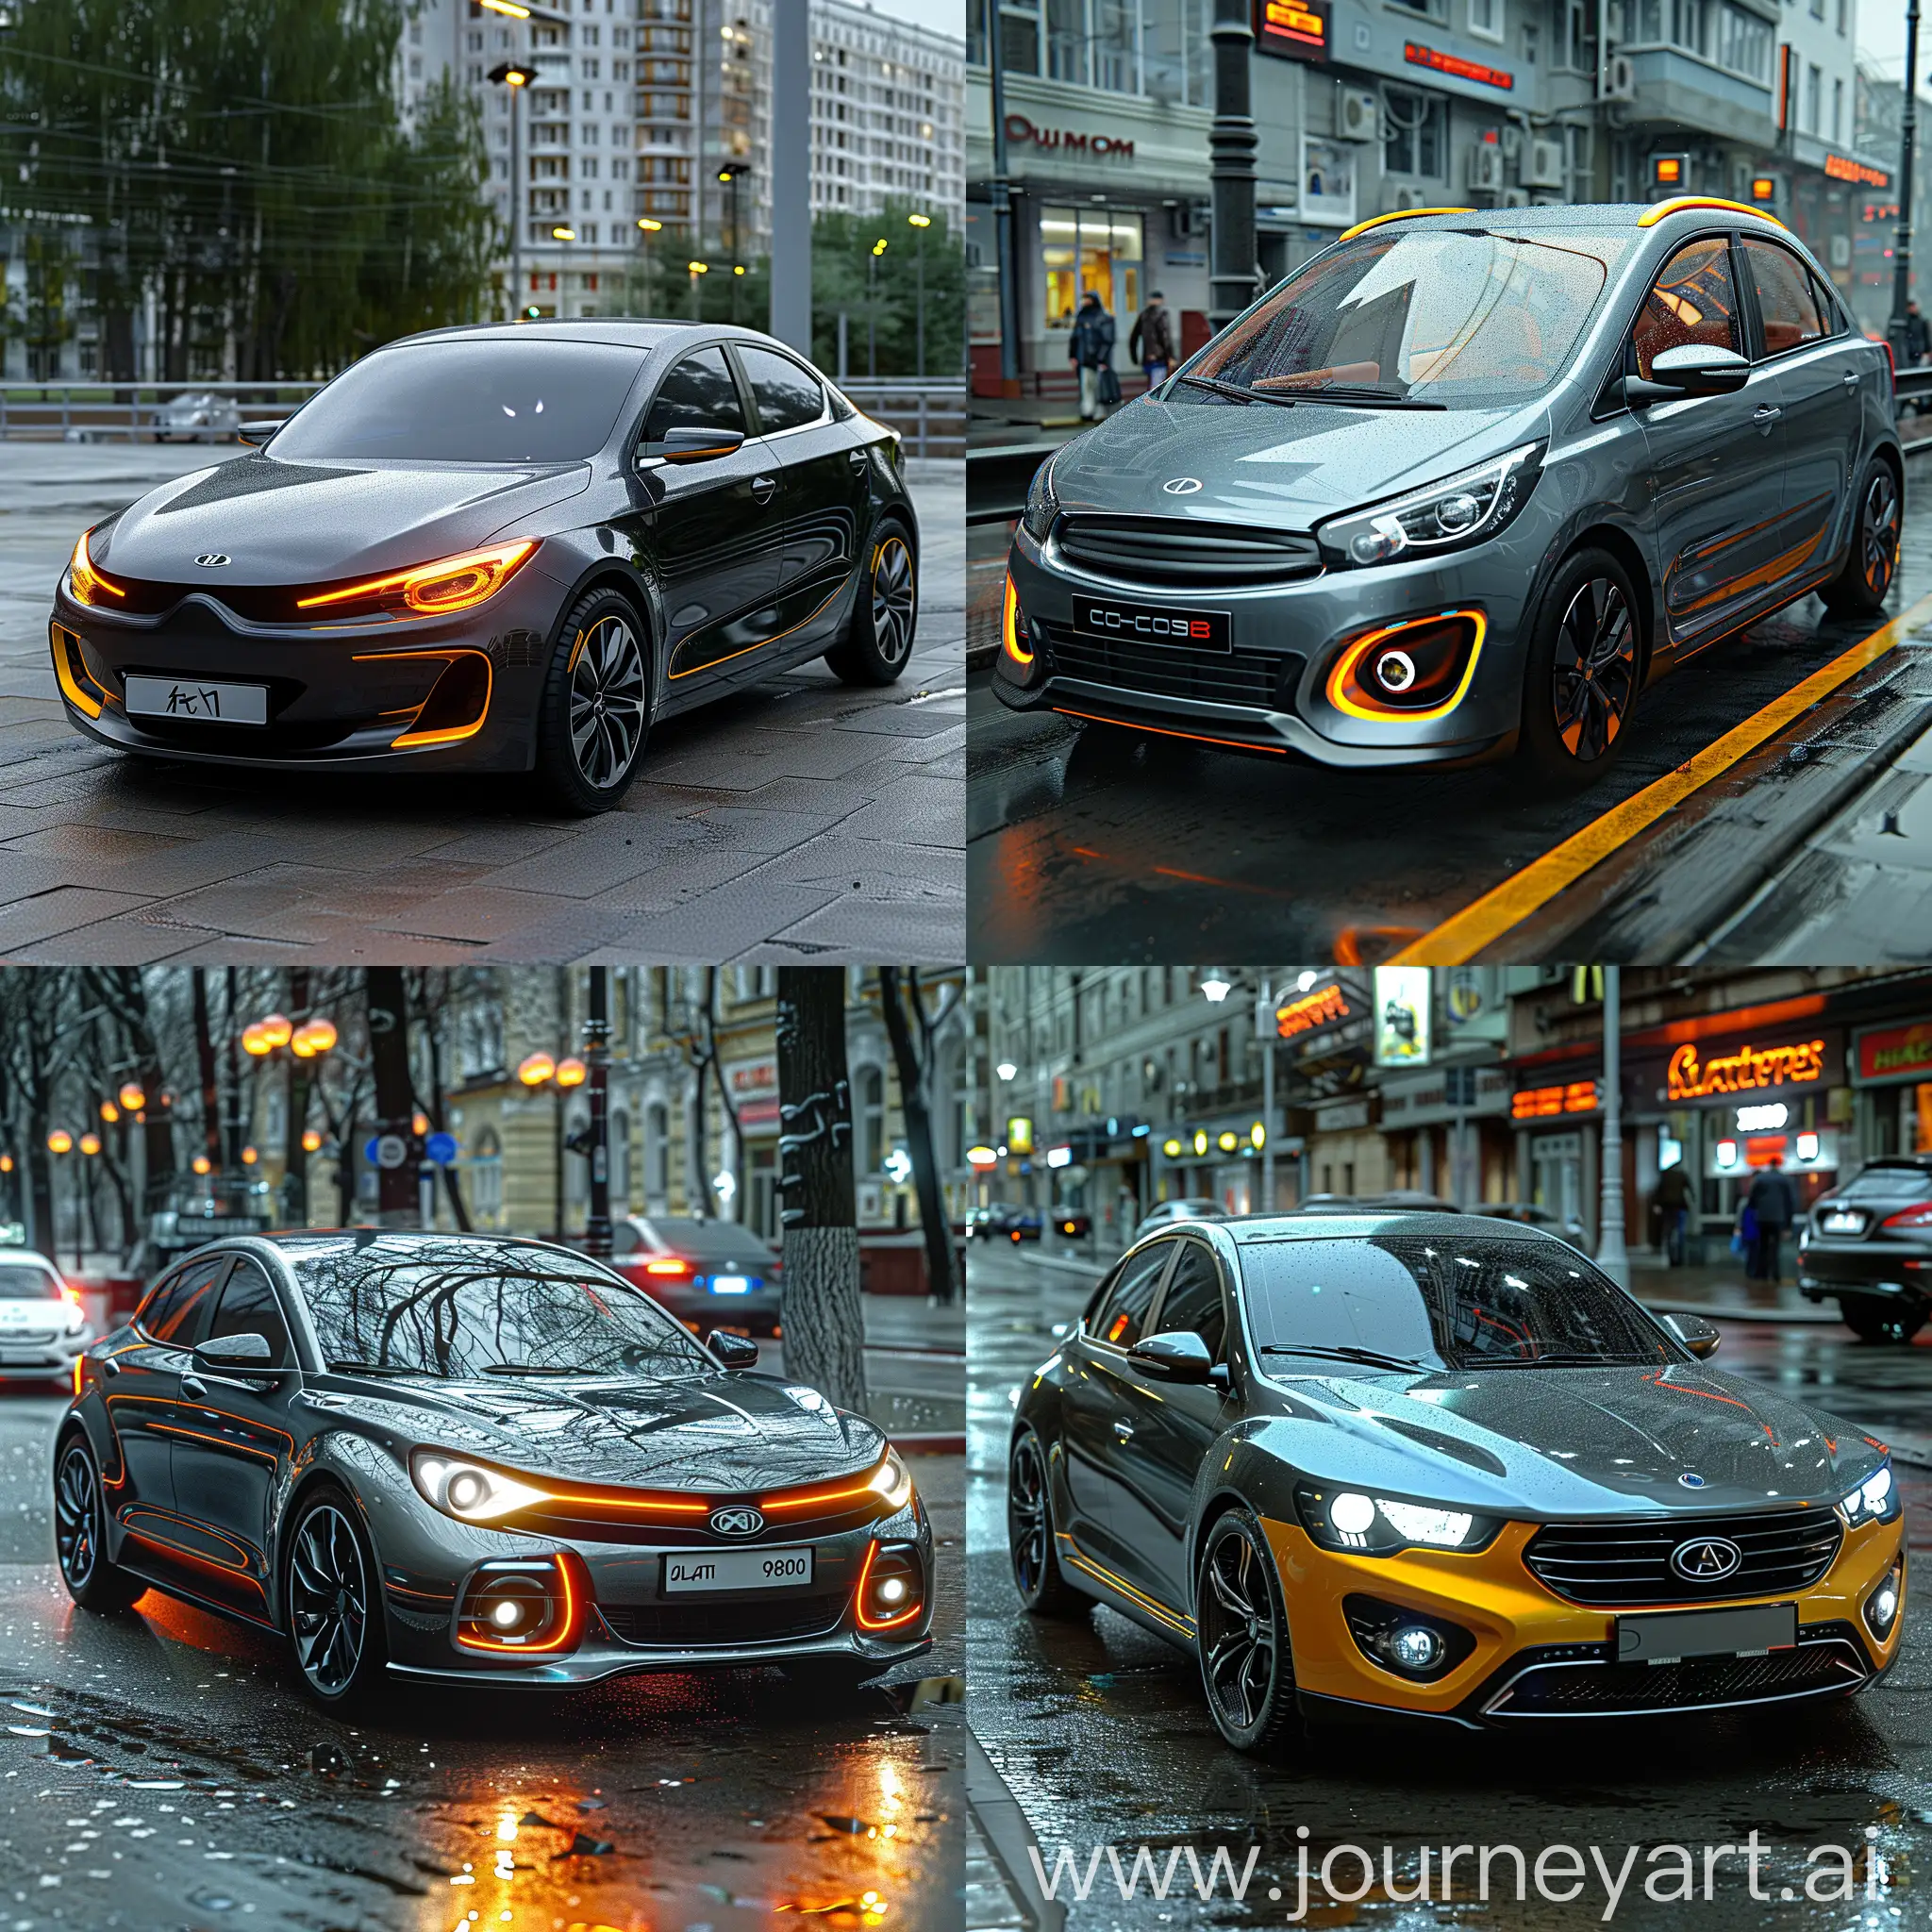 Futuristic LADA Vesta https://upload.wikimedia.org/wikipedia/commons/thumb/8/85/Lada_Vesta_%28cropped%29.jpg/280px-Lada_Vesta_%28cropped%29.jpg::1 Autonomous Driving:2 Augmented Reality Windshield:3 Biometric Driver Recognition:4 Advanced Connectivity:5 Health Monitoring System:6 Gesture Control:7 Self-Healing Paint:8 Advanced Energy Management:9 Intelligent Parking Assistance:10 Personalized AI Assistant:11 octane render --stylize 1000